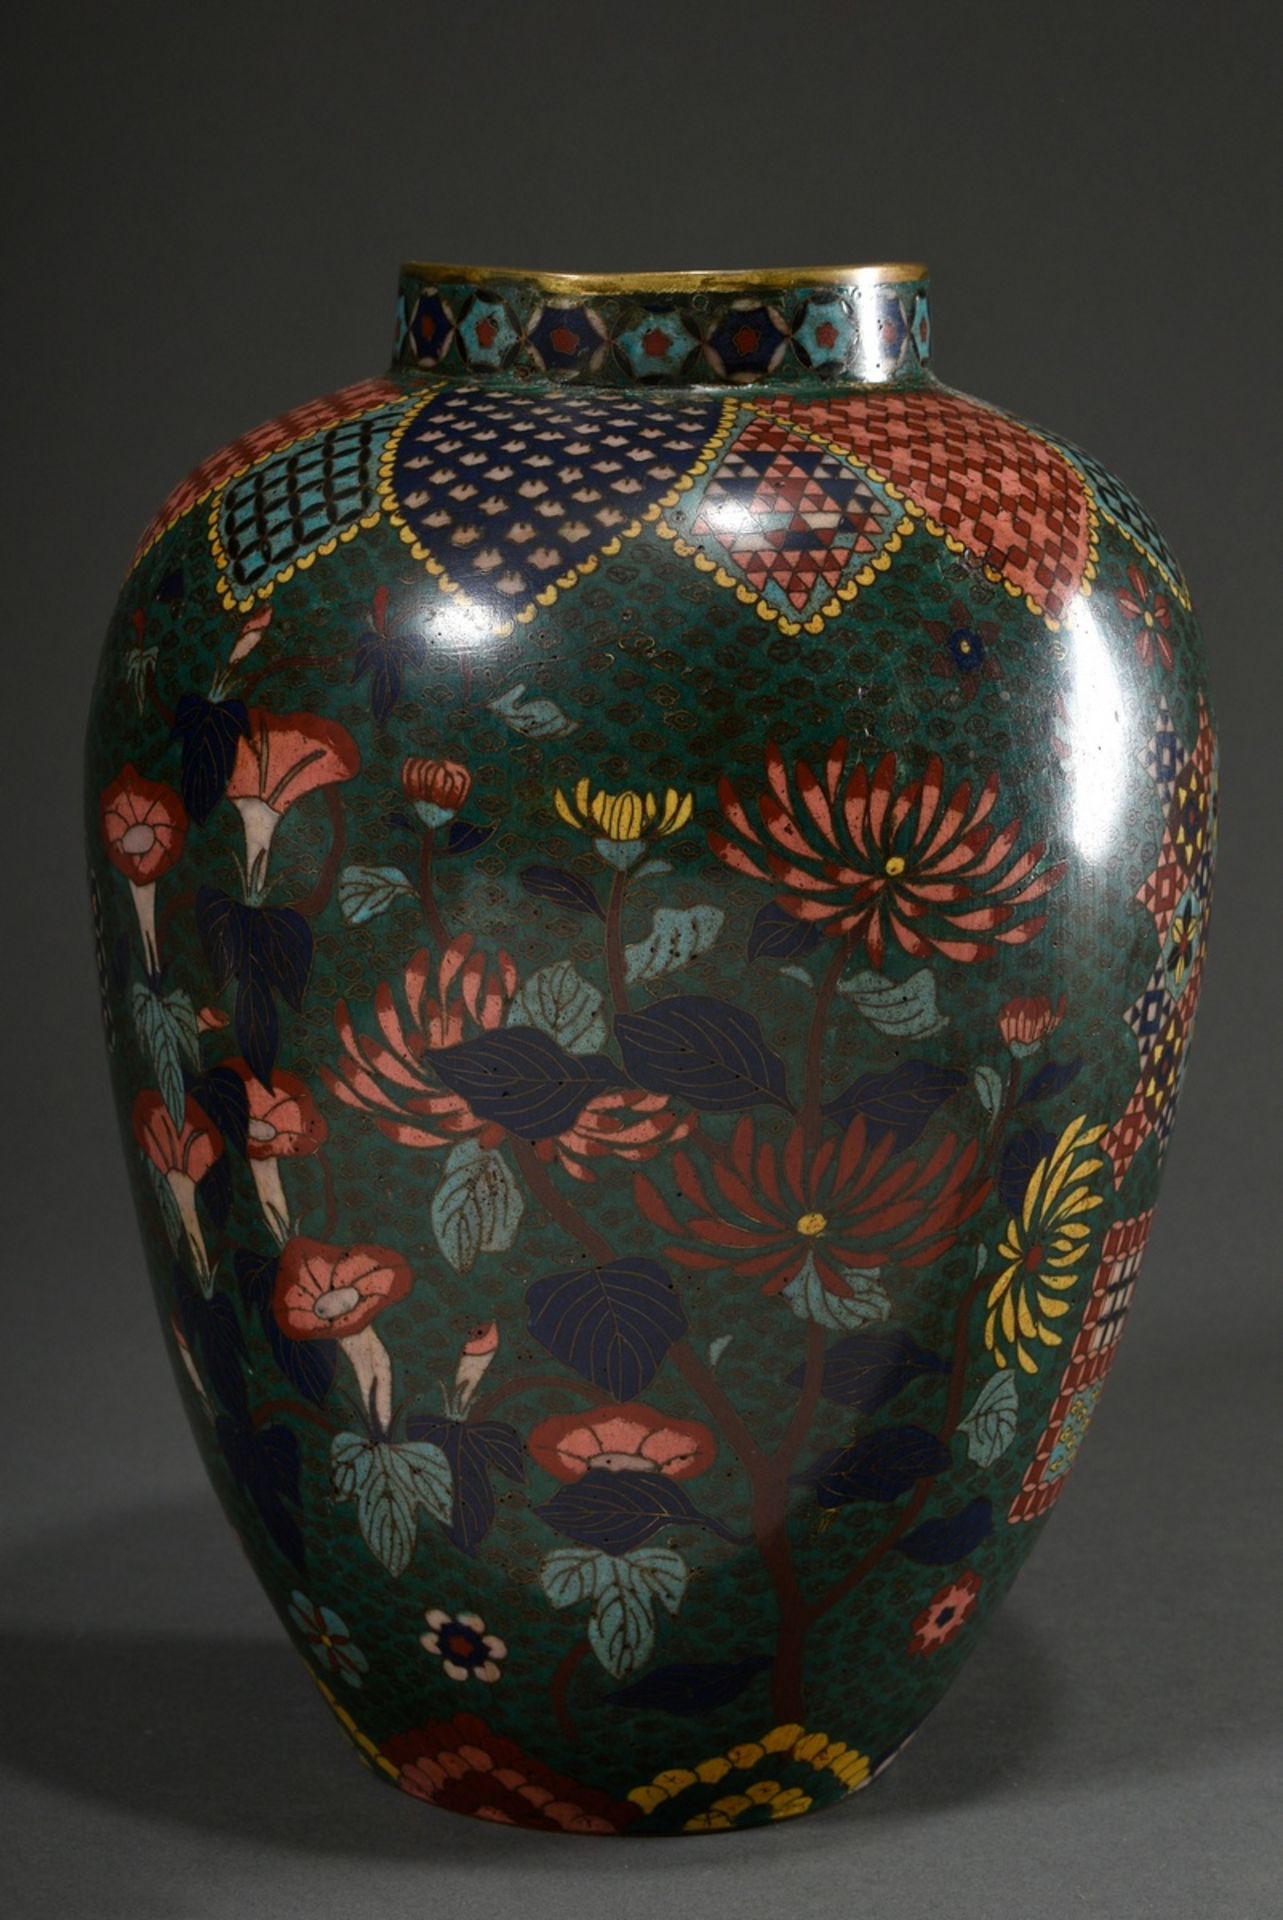 Large cloisonné shoulder vase with floral and geometric decoration in dark shades on a dark green b